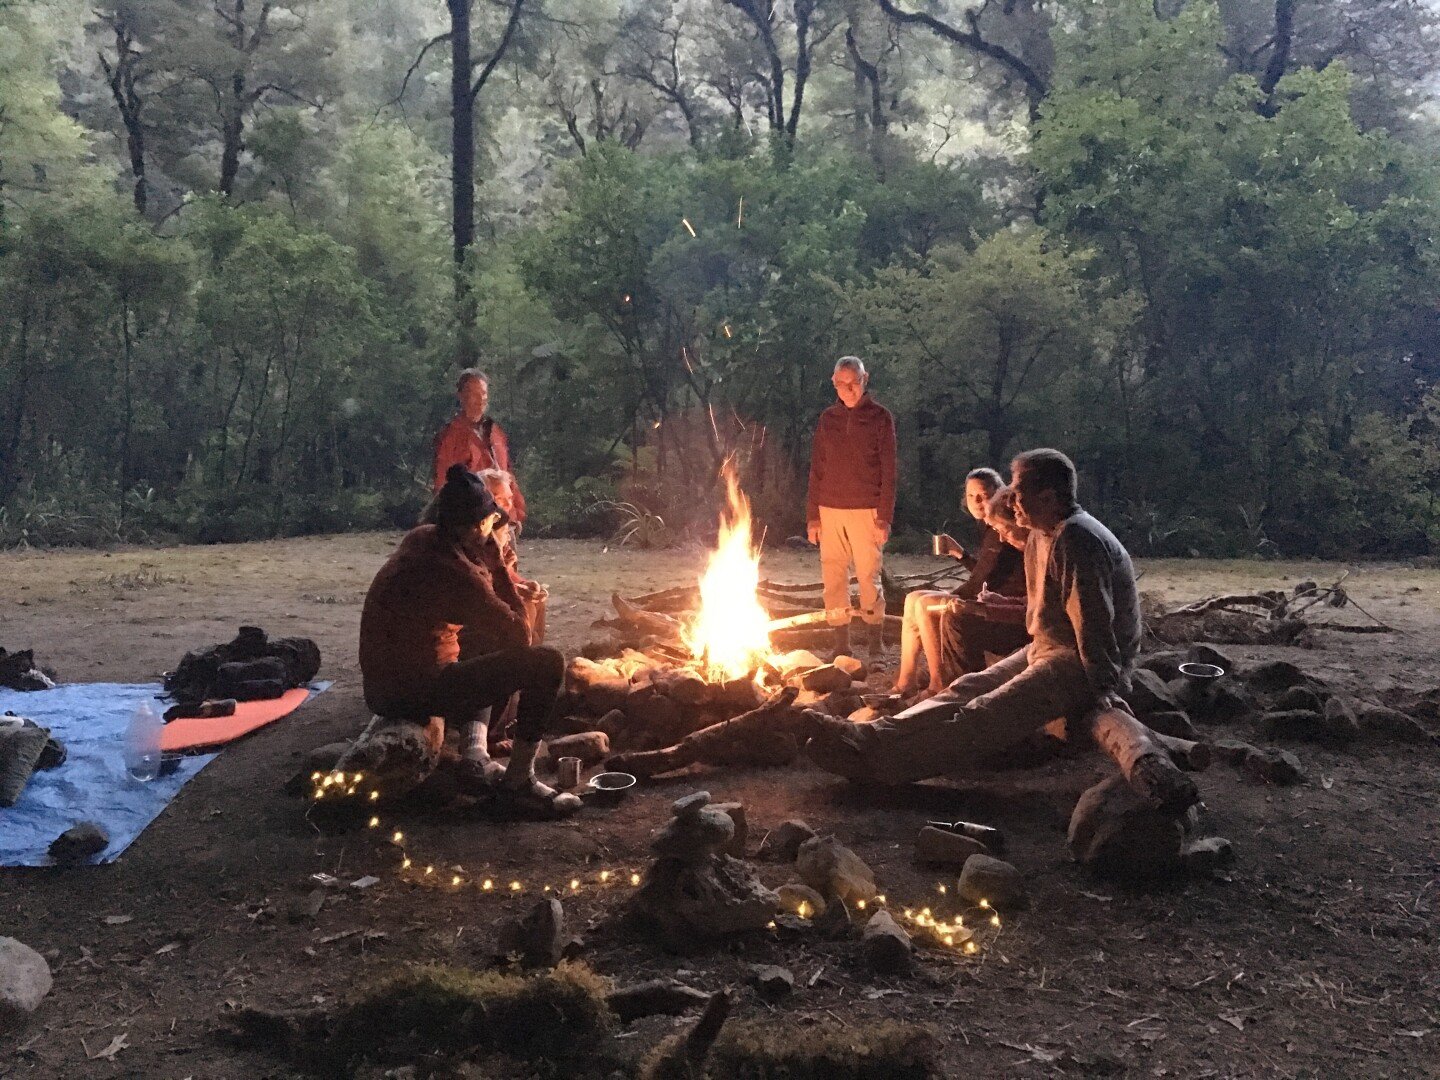 Share stories around the campfire with new friends after an exciting day of hiking.